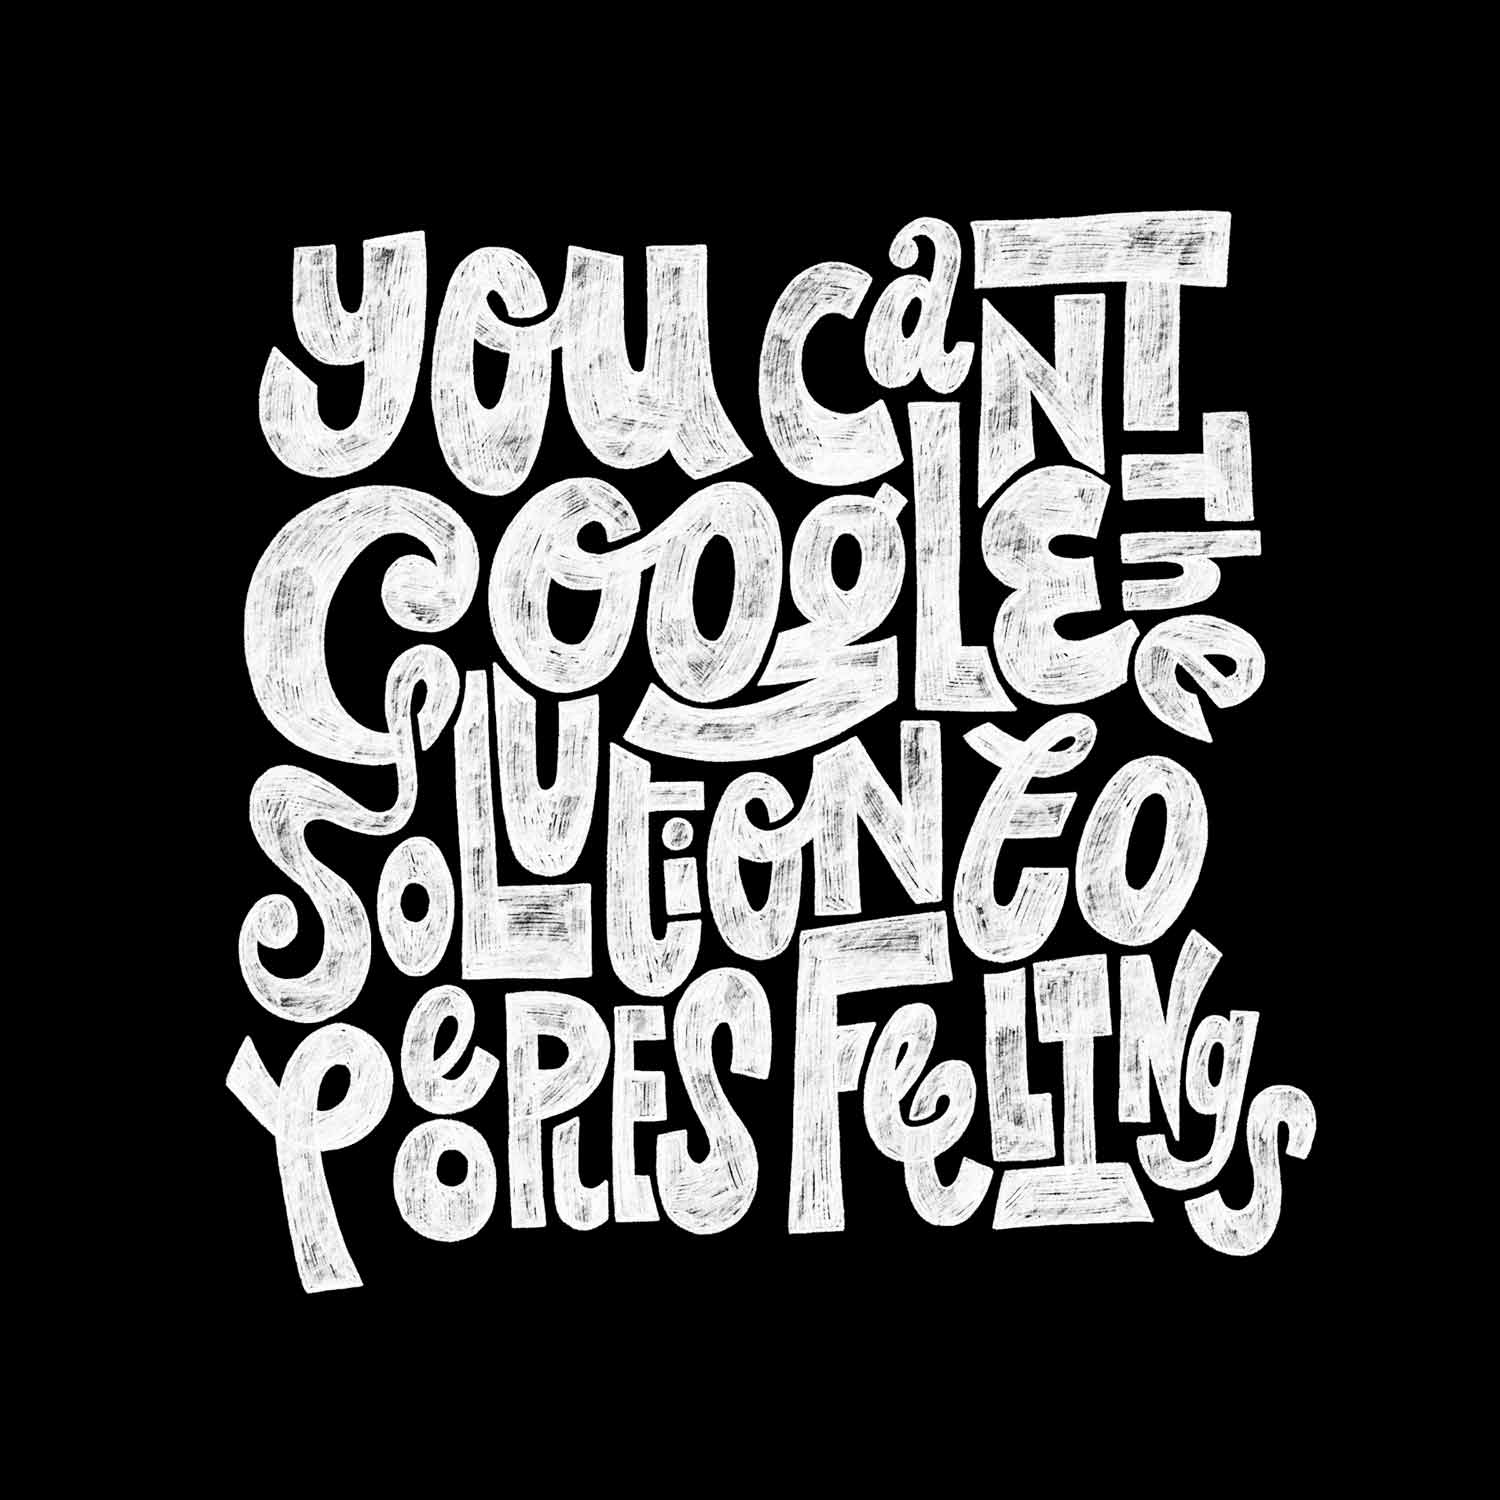 Hand drawn typography that says You can't google the solution to peoples feelings